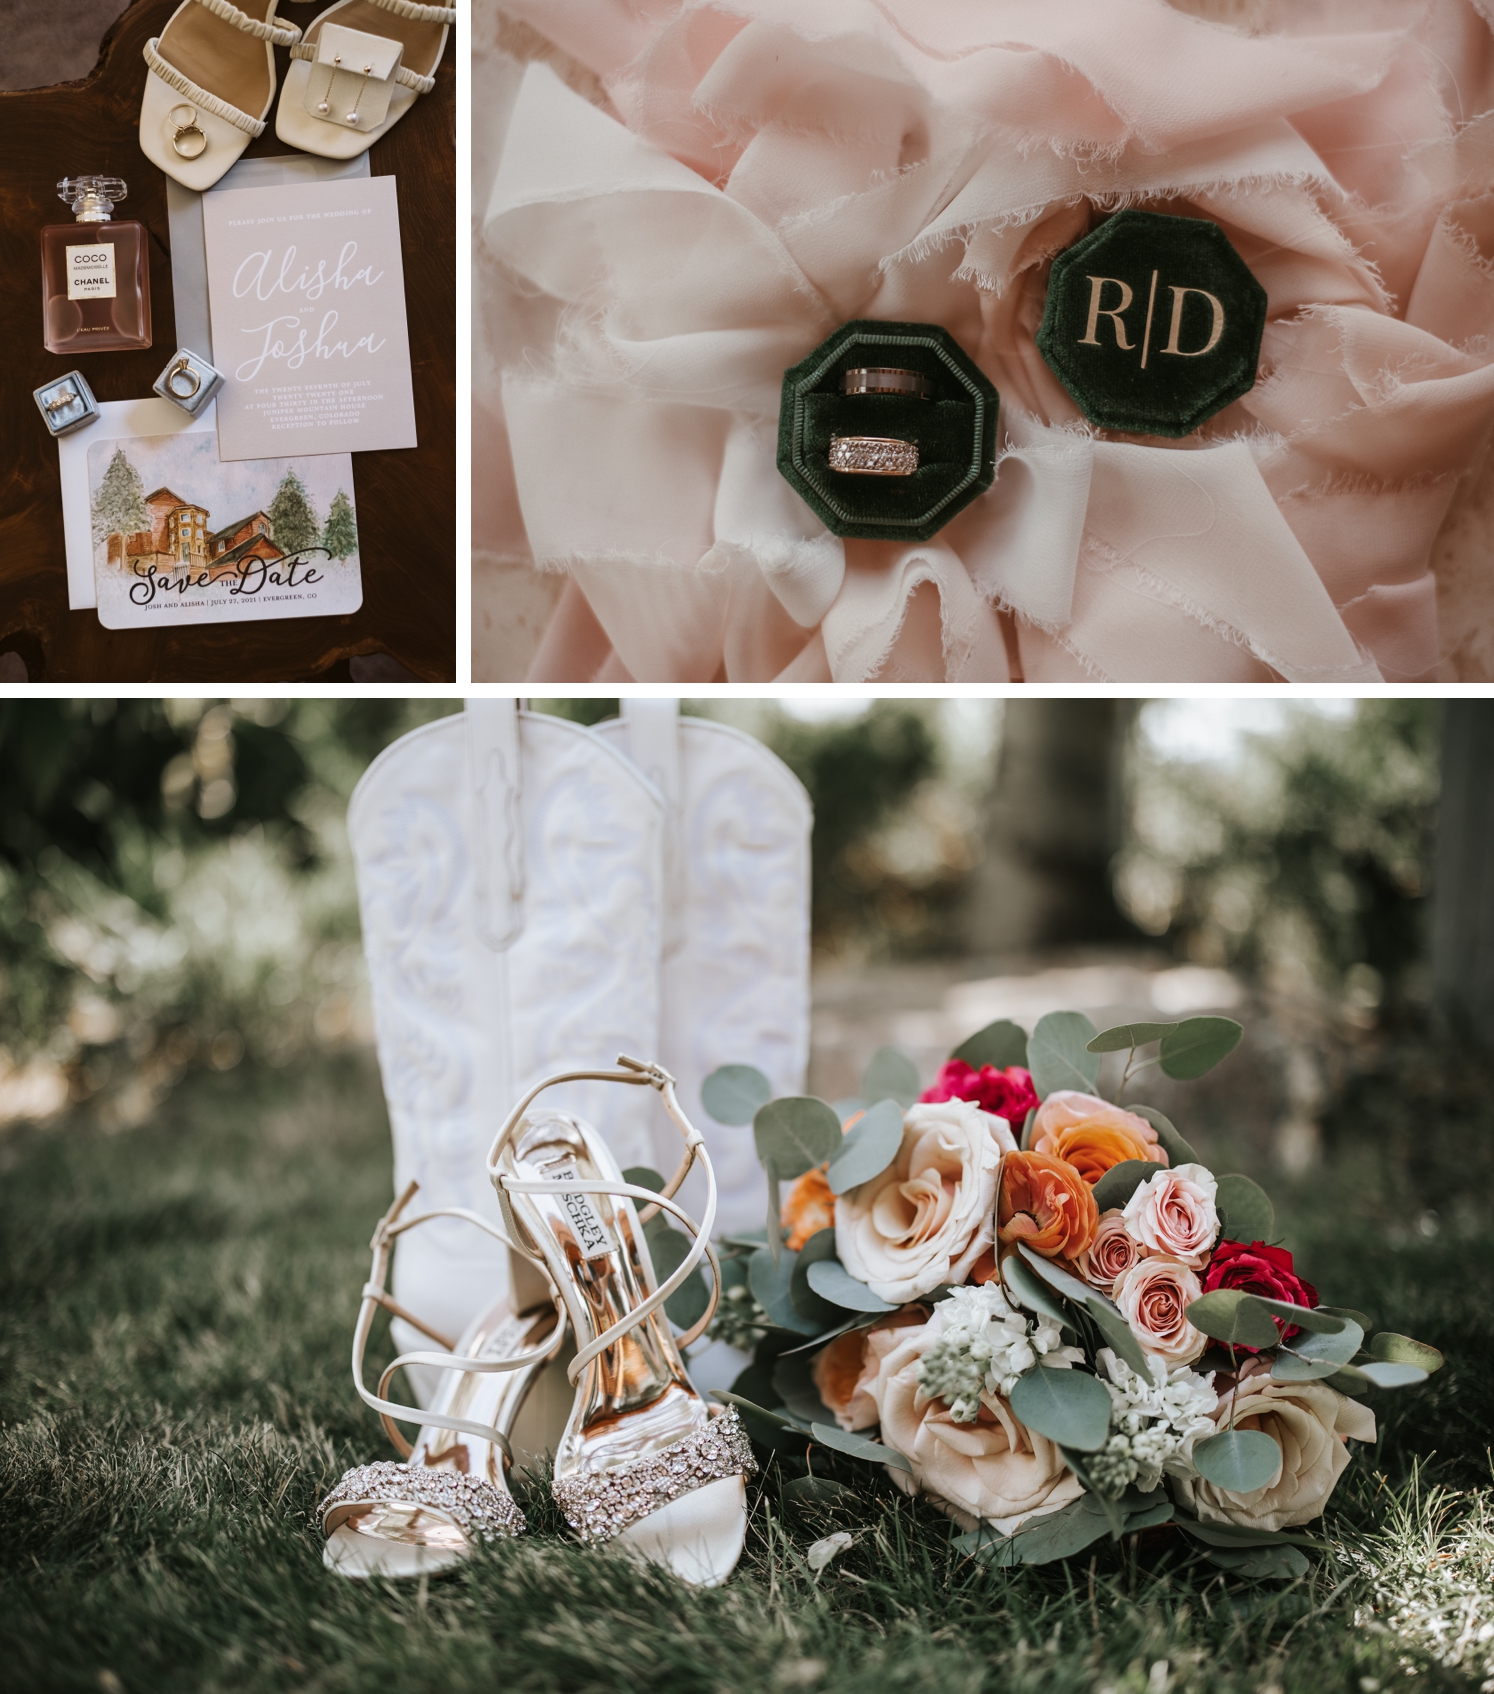 Bride's rings, jewelry, perfume, shoes, and invitation details shot | wedding rings in green box nested in pink fabric | bride's ceremony and reception shoes and wedding bouquet | McArthur Weddings and Events
